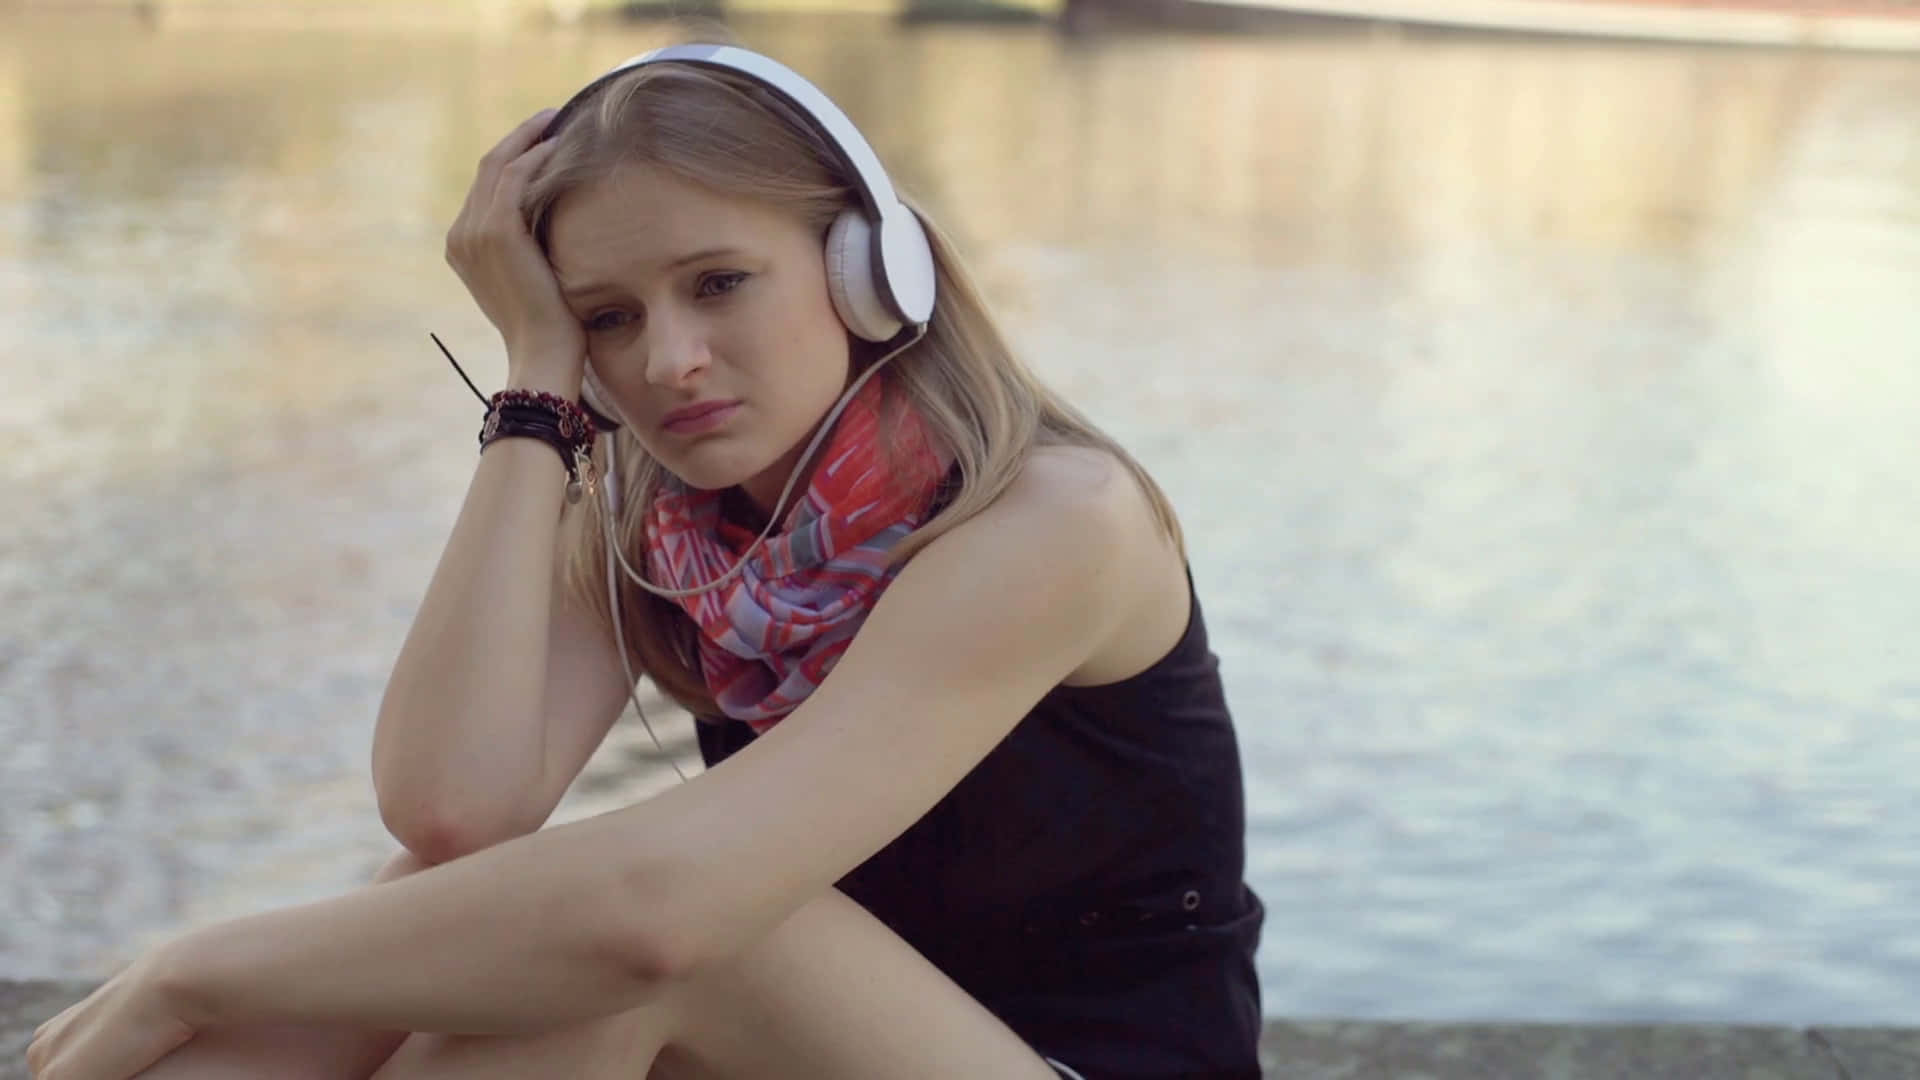 A Girl Sitting On The Edge Of A River With Headphones On